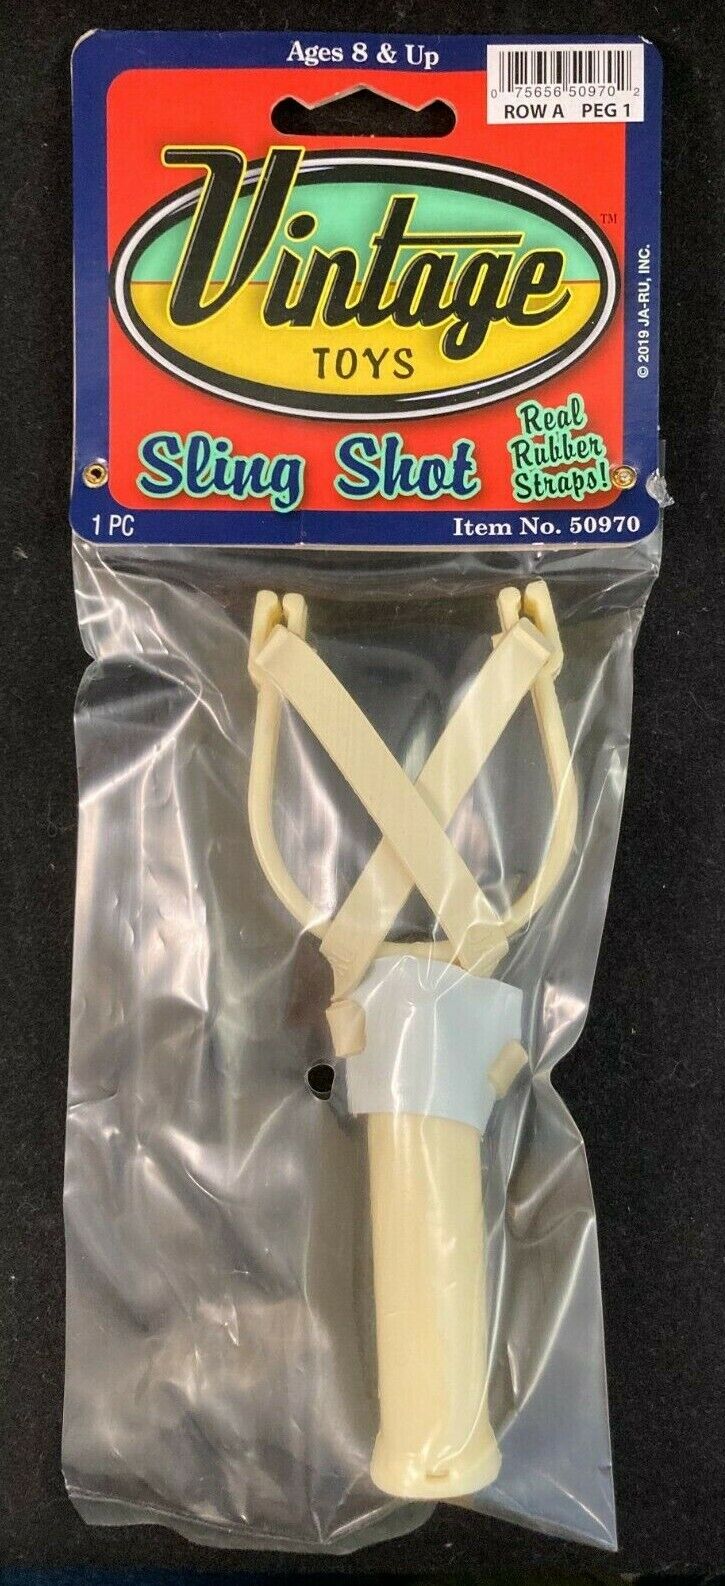 Vintage Toys - Sling Shot - Real Rubber Straps - Ages 8 & Up - Approx. 5.5" Long